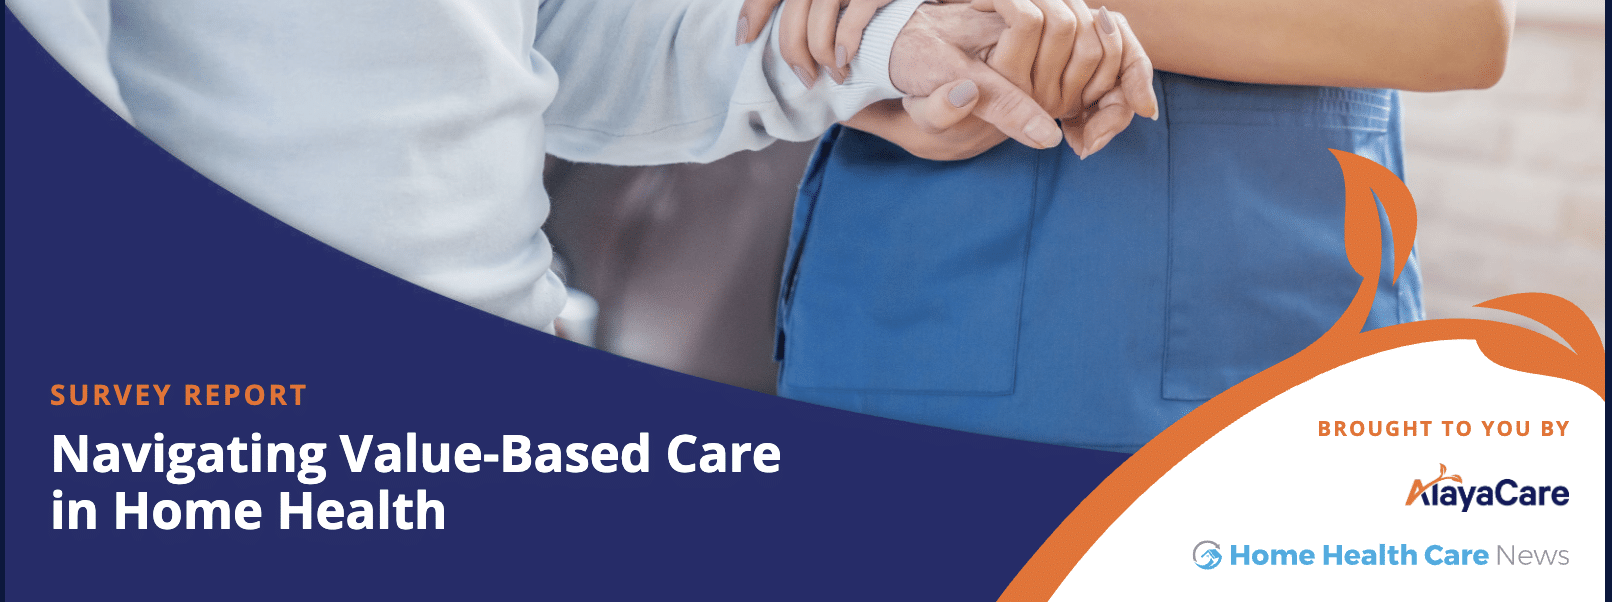 2022 Value Based Care Report by Alayacare and HHCN